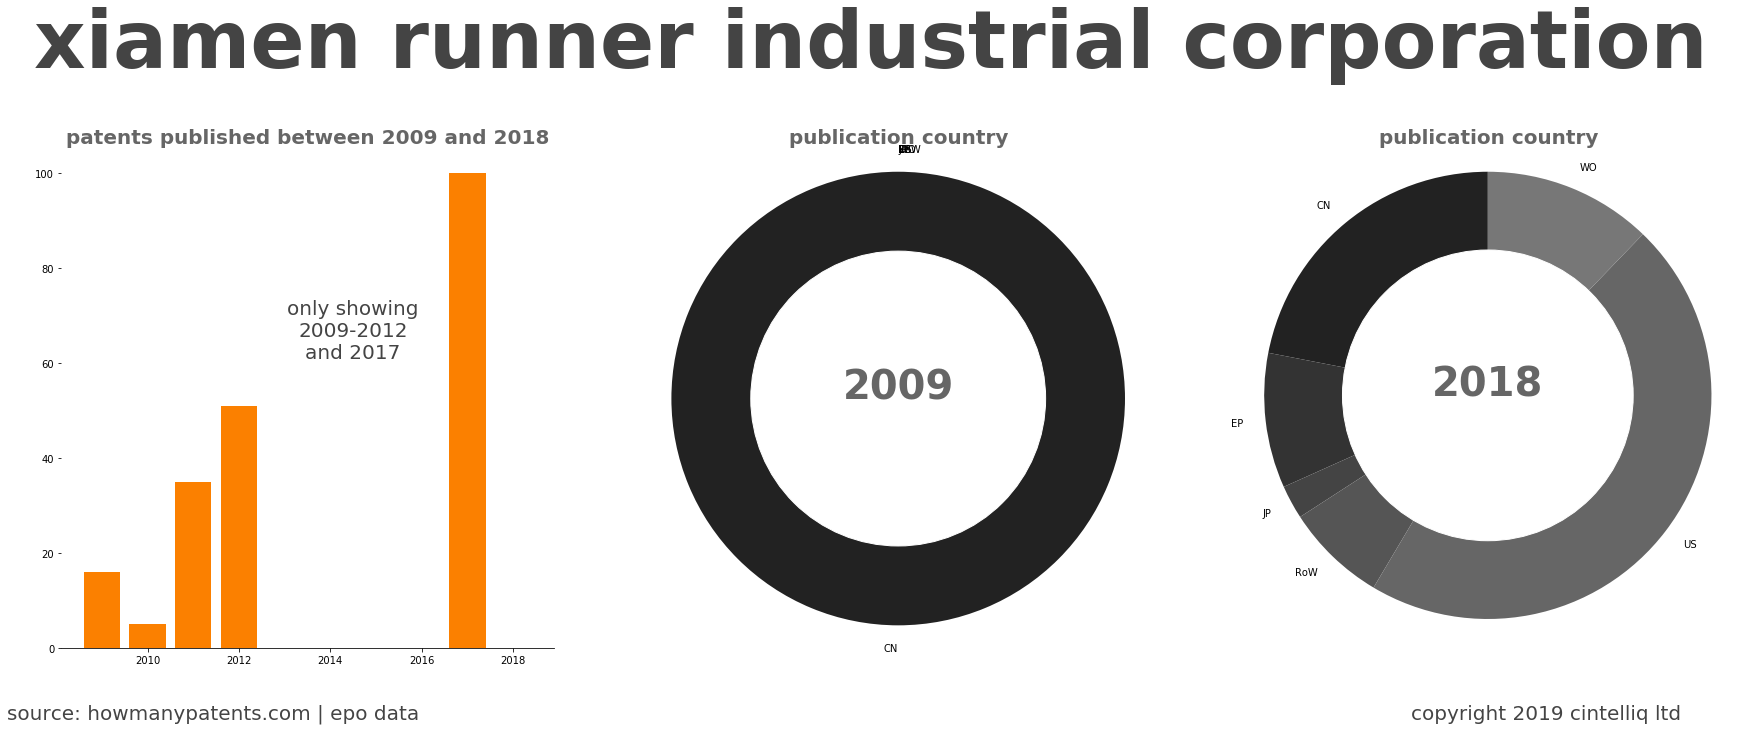 summary of patents for Xiamen Runner Industrial Corporation